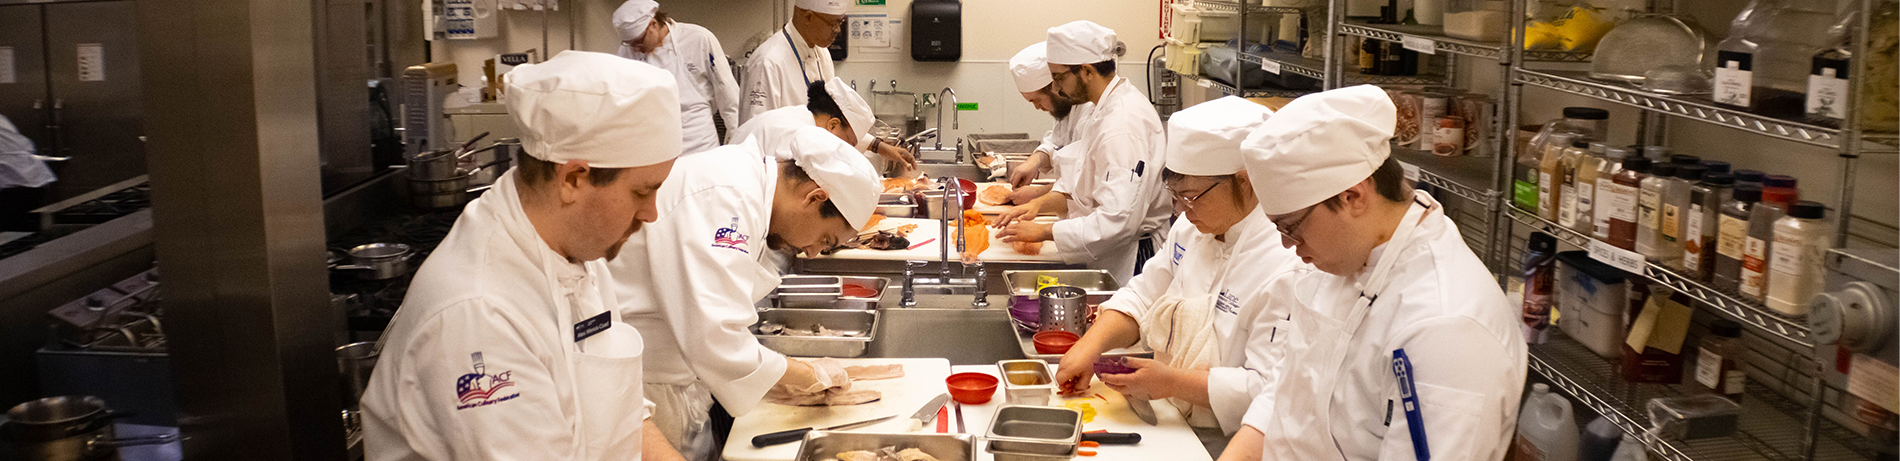 Culinary students working around a prep table